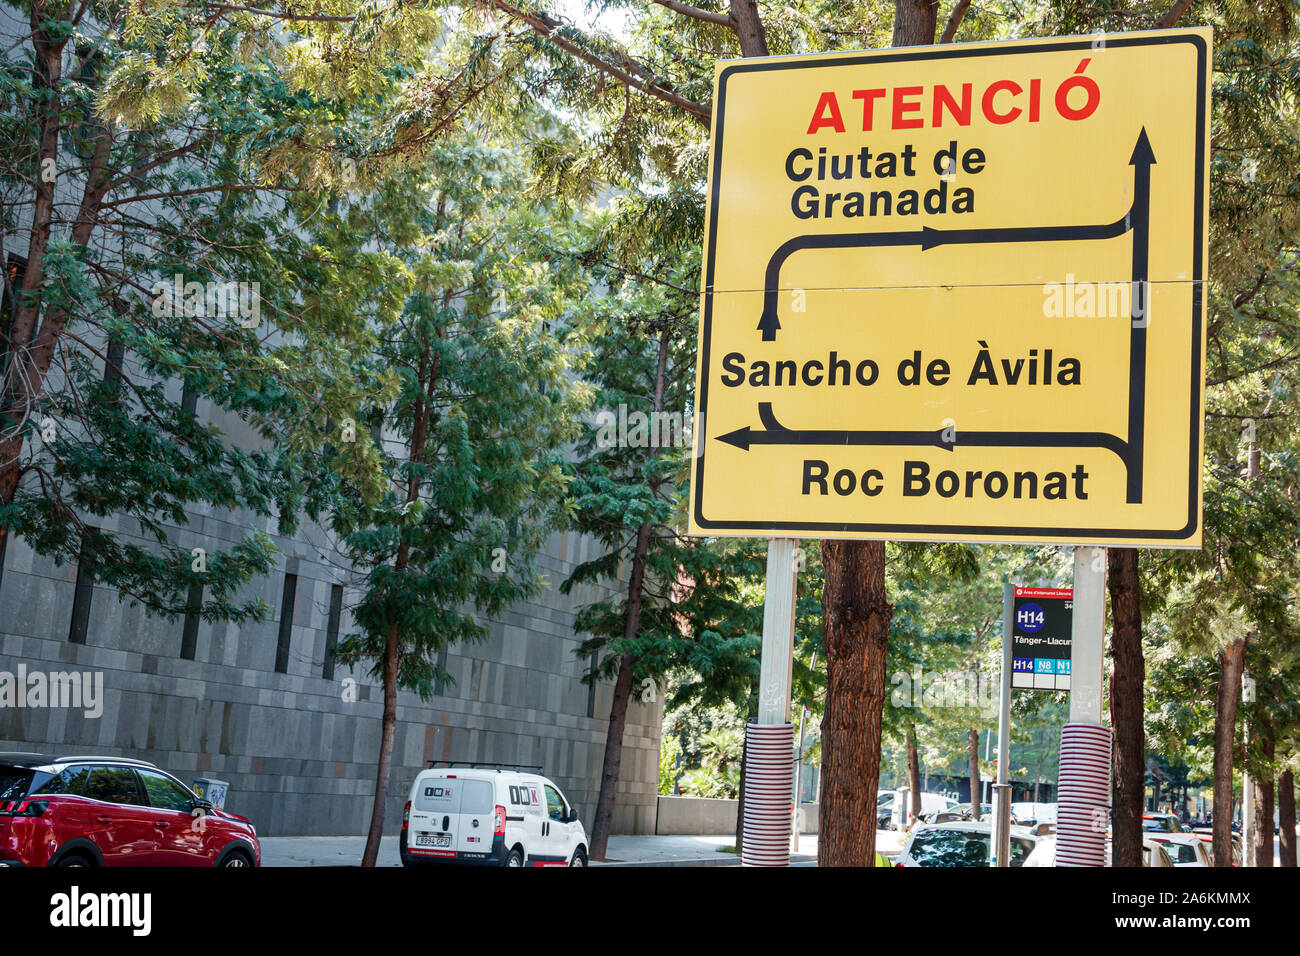 Barcelona Spain,Catalonia Poblenou,street traffic sign,directions,Catalan language,attention,ES190822006 Stock Photo